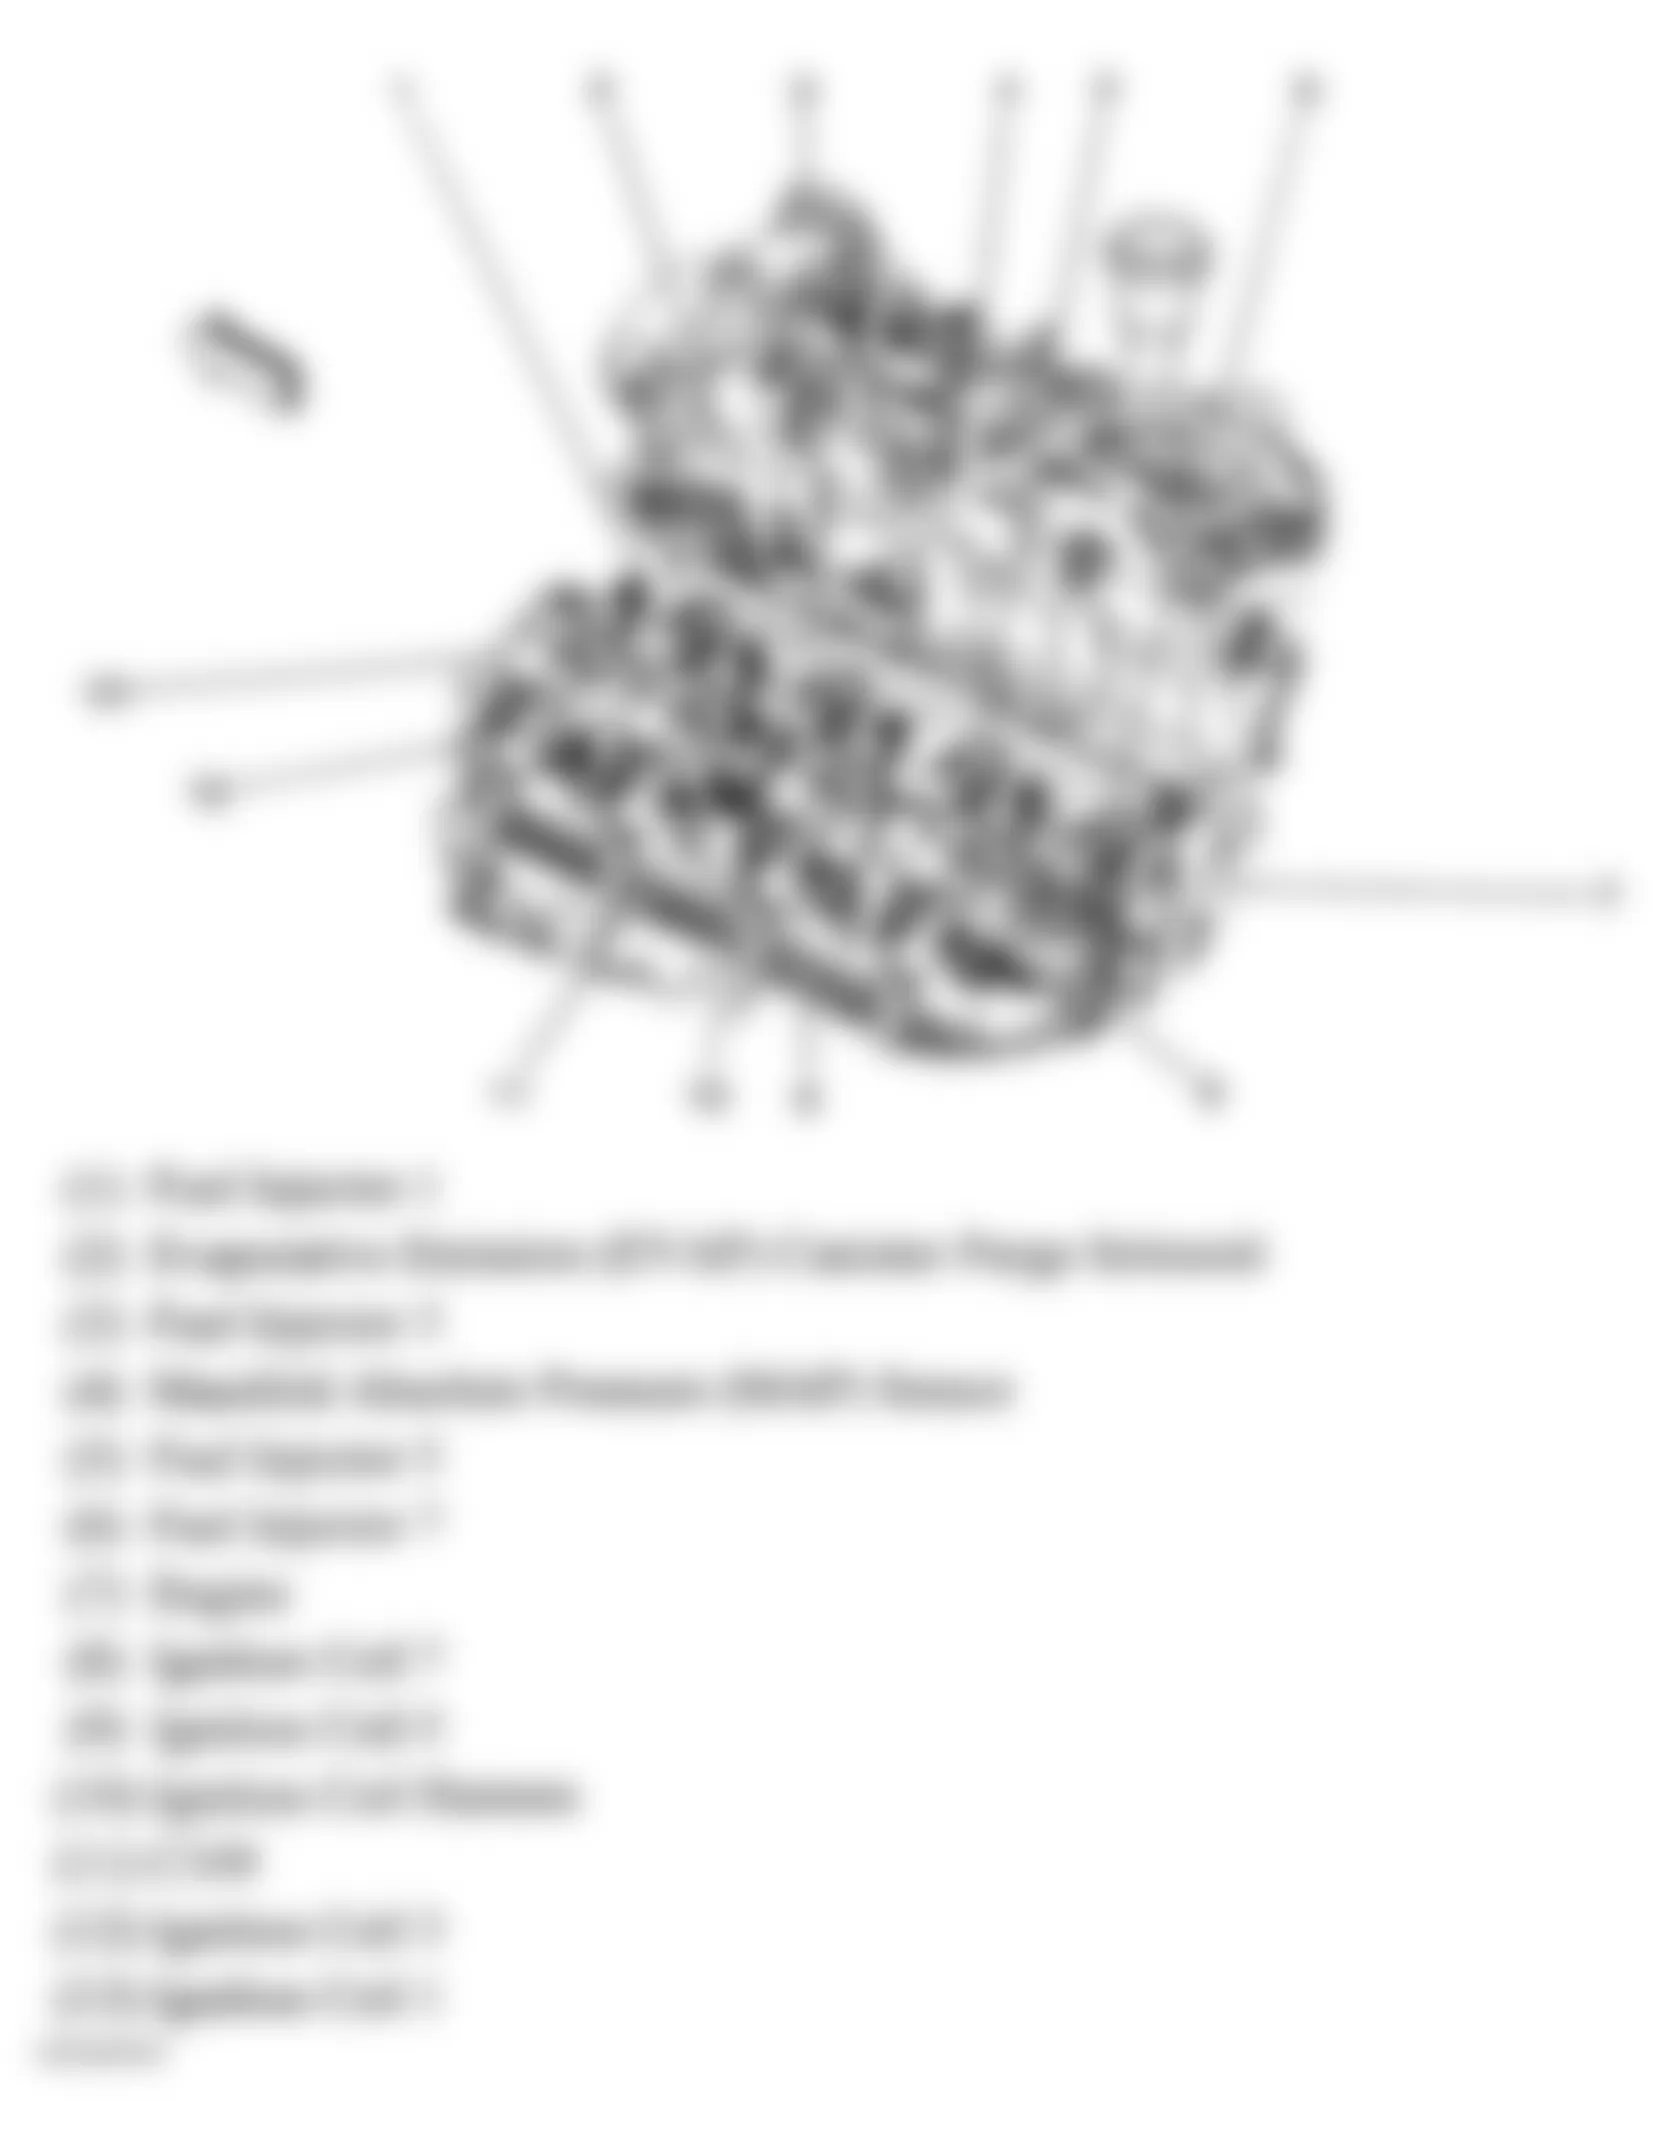 GMC Envoy XL 2006 - Component Locations -  Upper Left Side Of Engine (5.3L/6.0L)